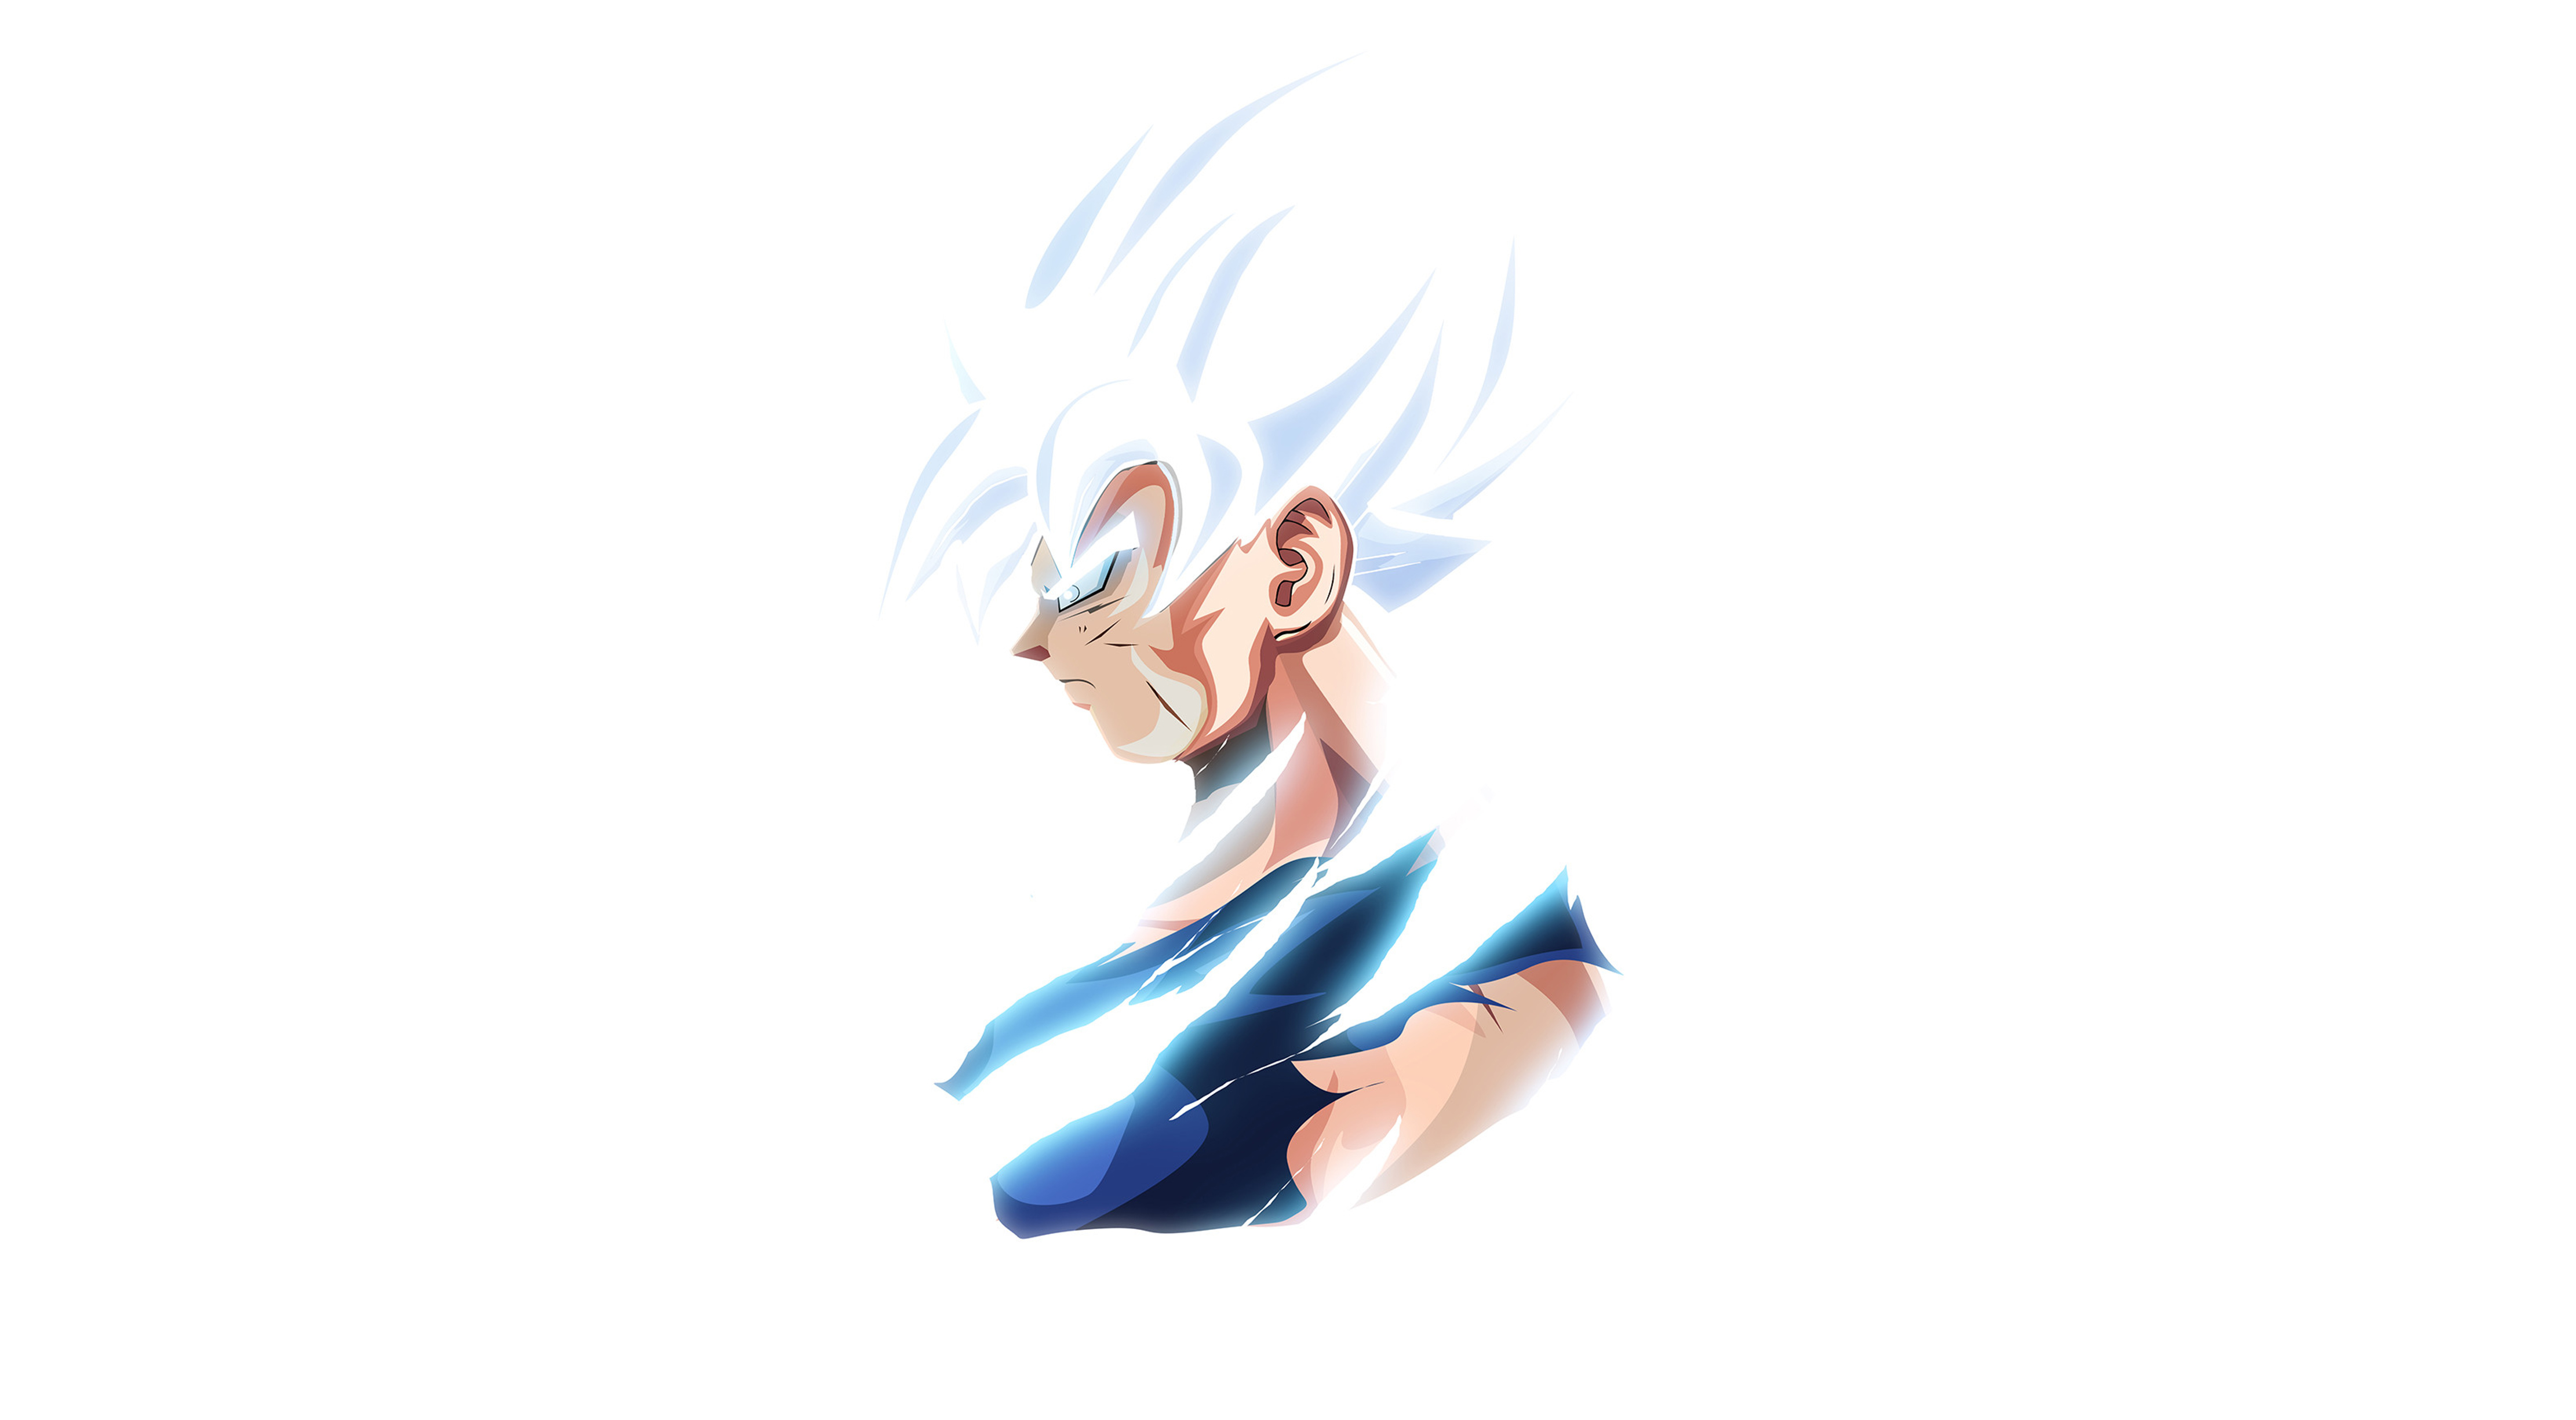 Goku ultra instinct dragon ball minimal k hd anime k wallpapers images backgrounds photos and pictures